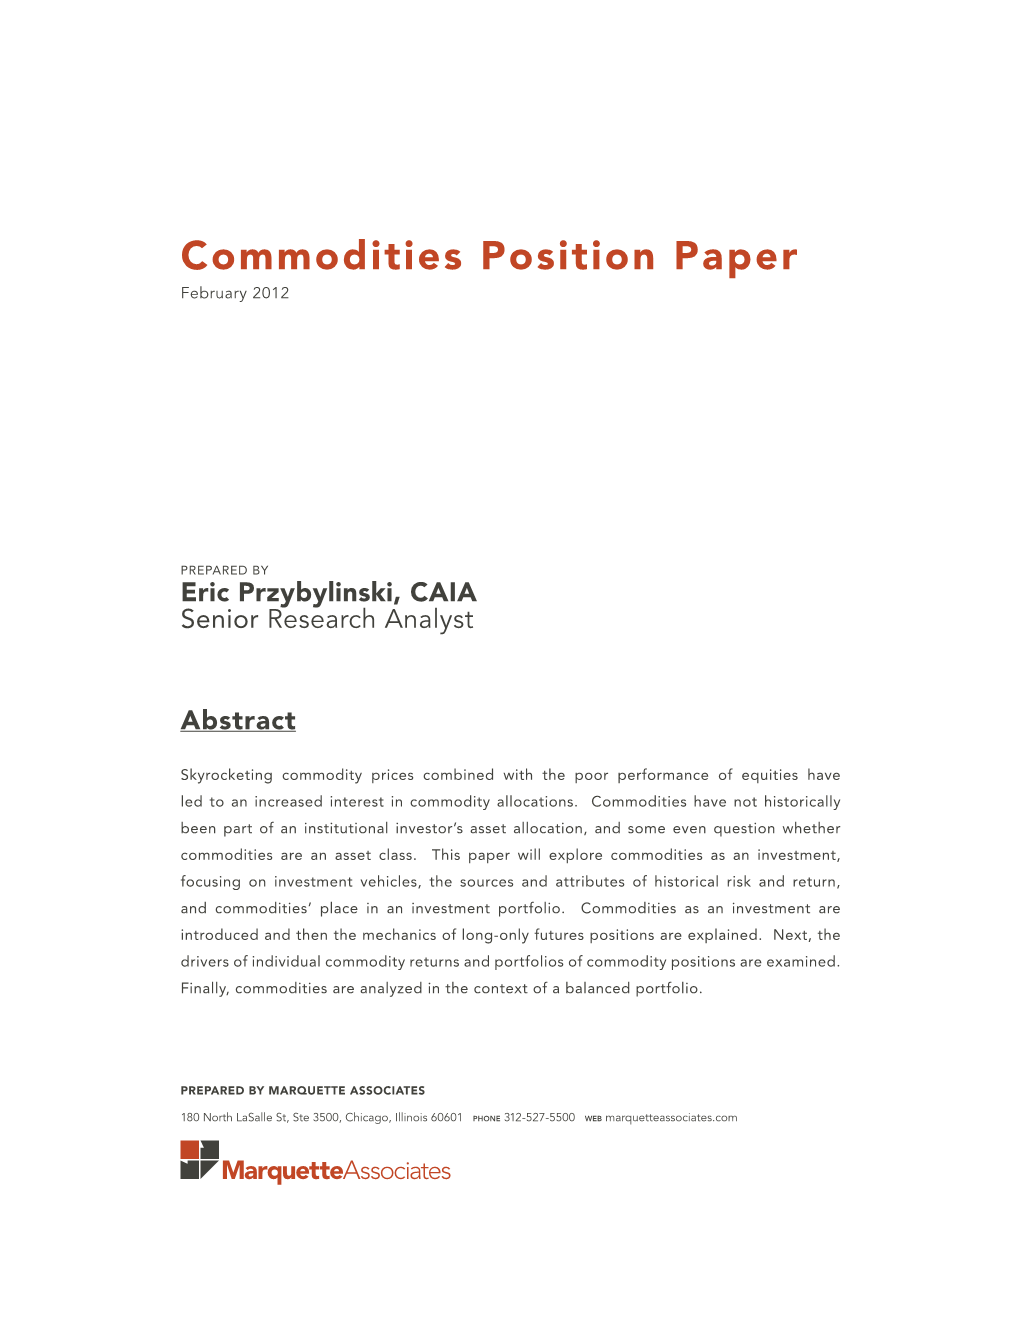 Commodities Position Paper February 2012